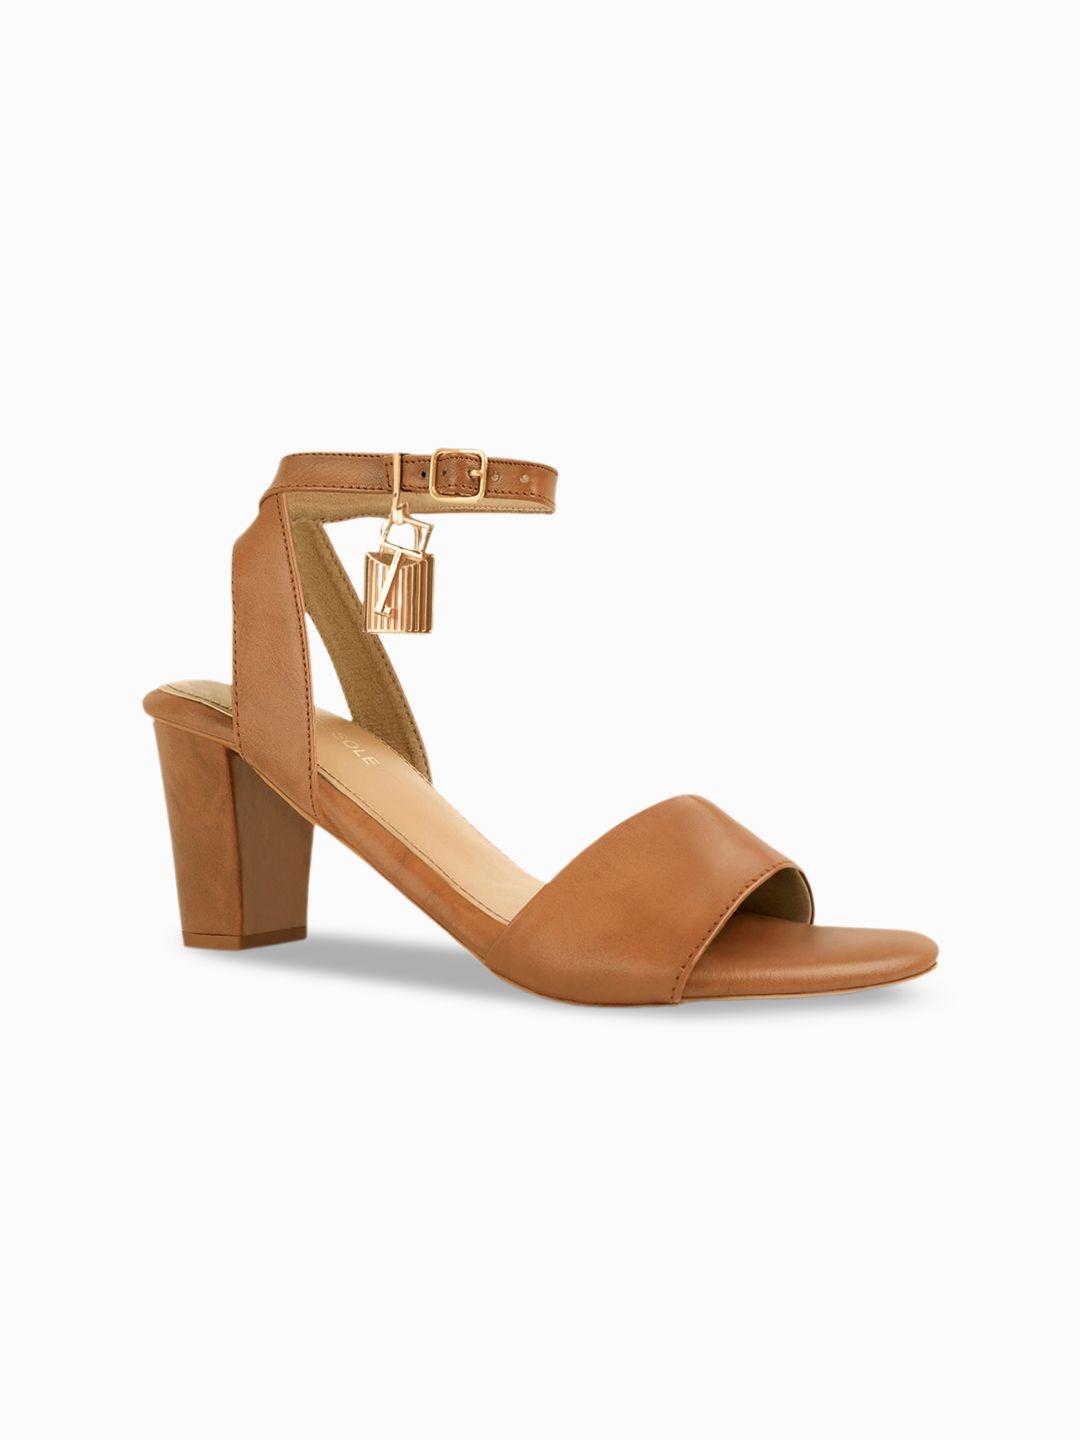 signature sole open toe block heels with ankle loop & buckles detail